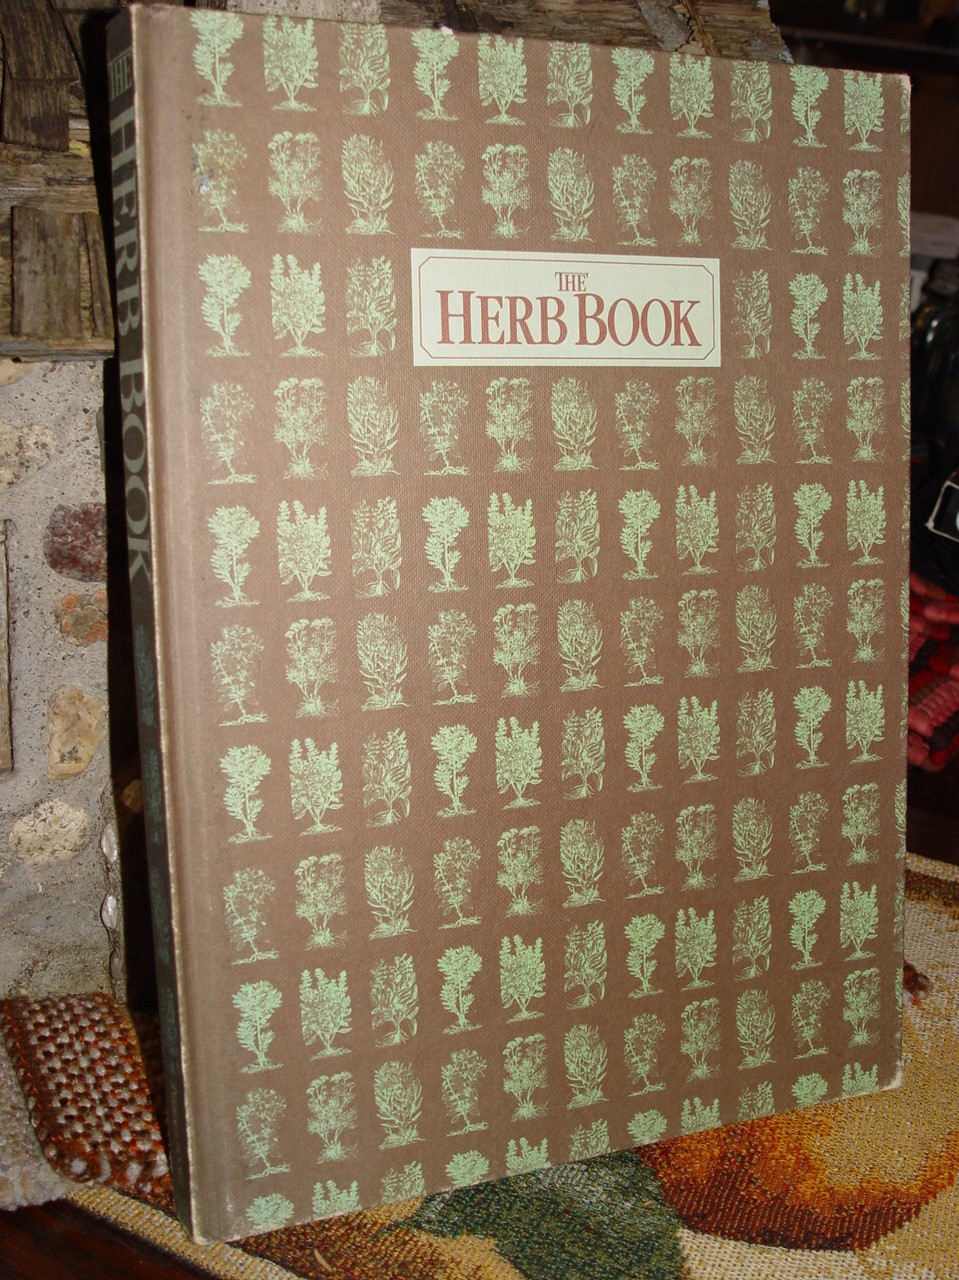 The Herb Book1985 by Arabella Boxer